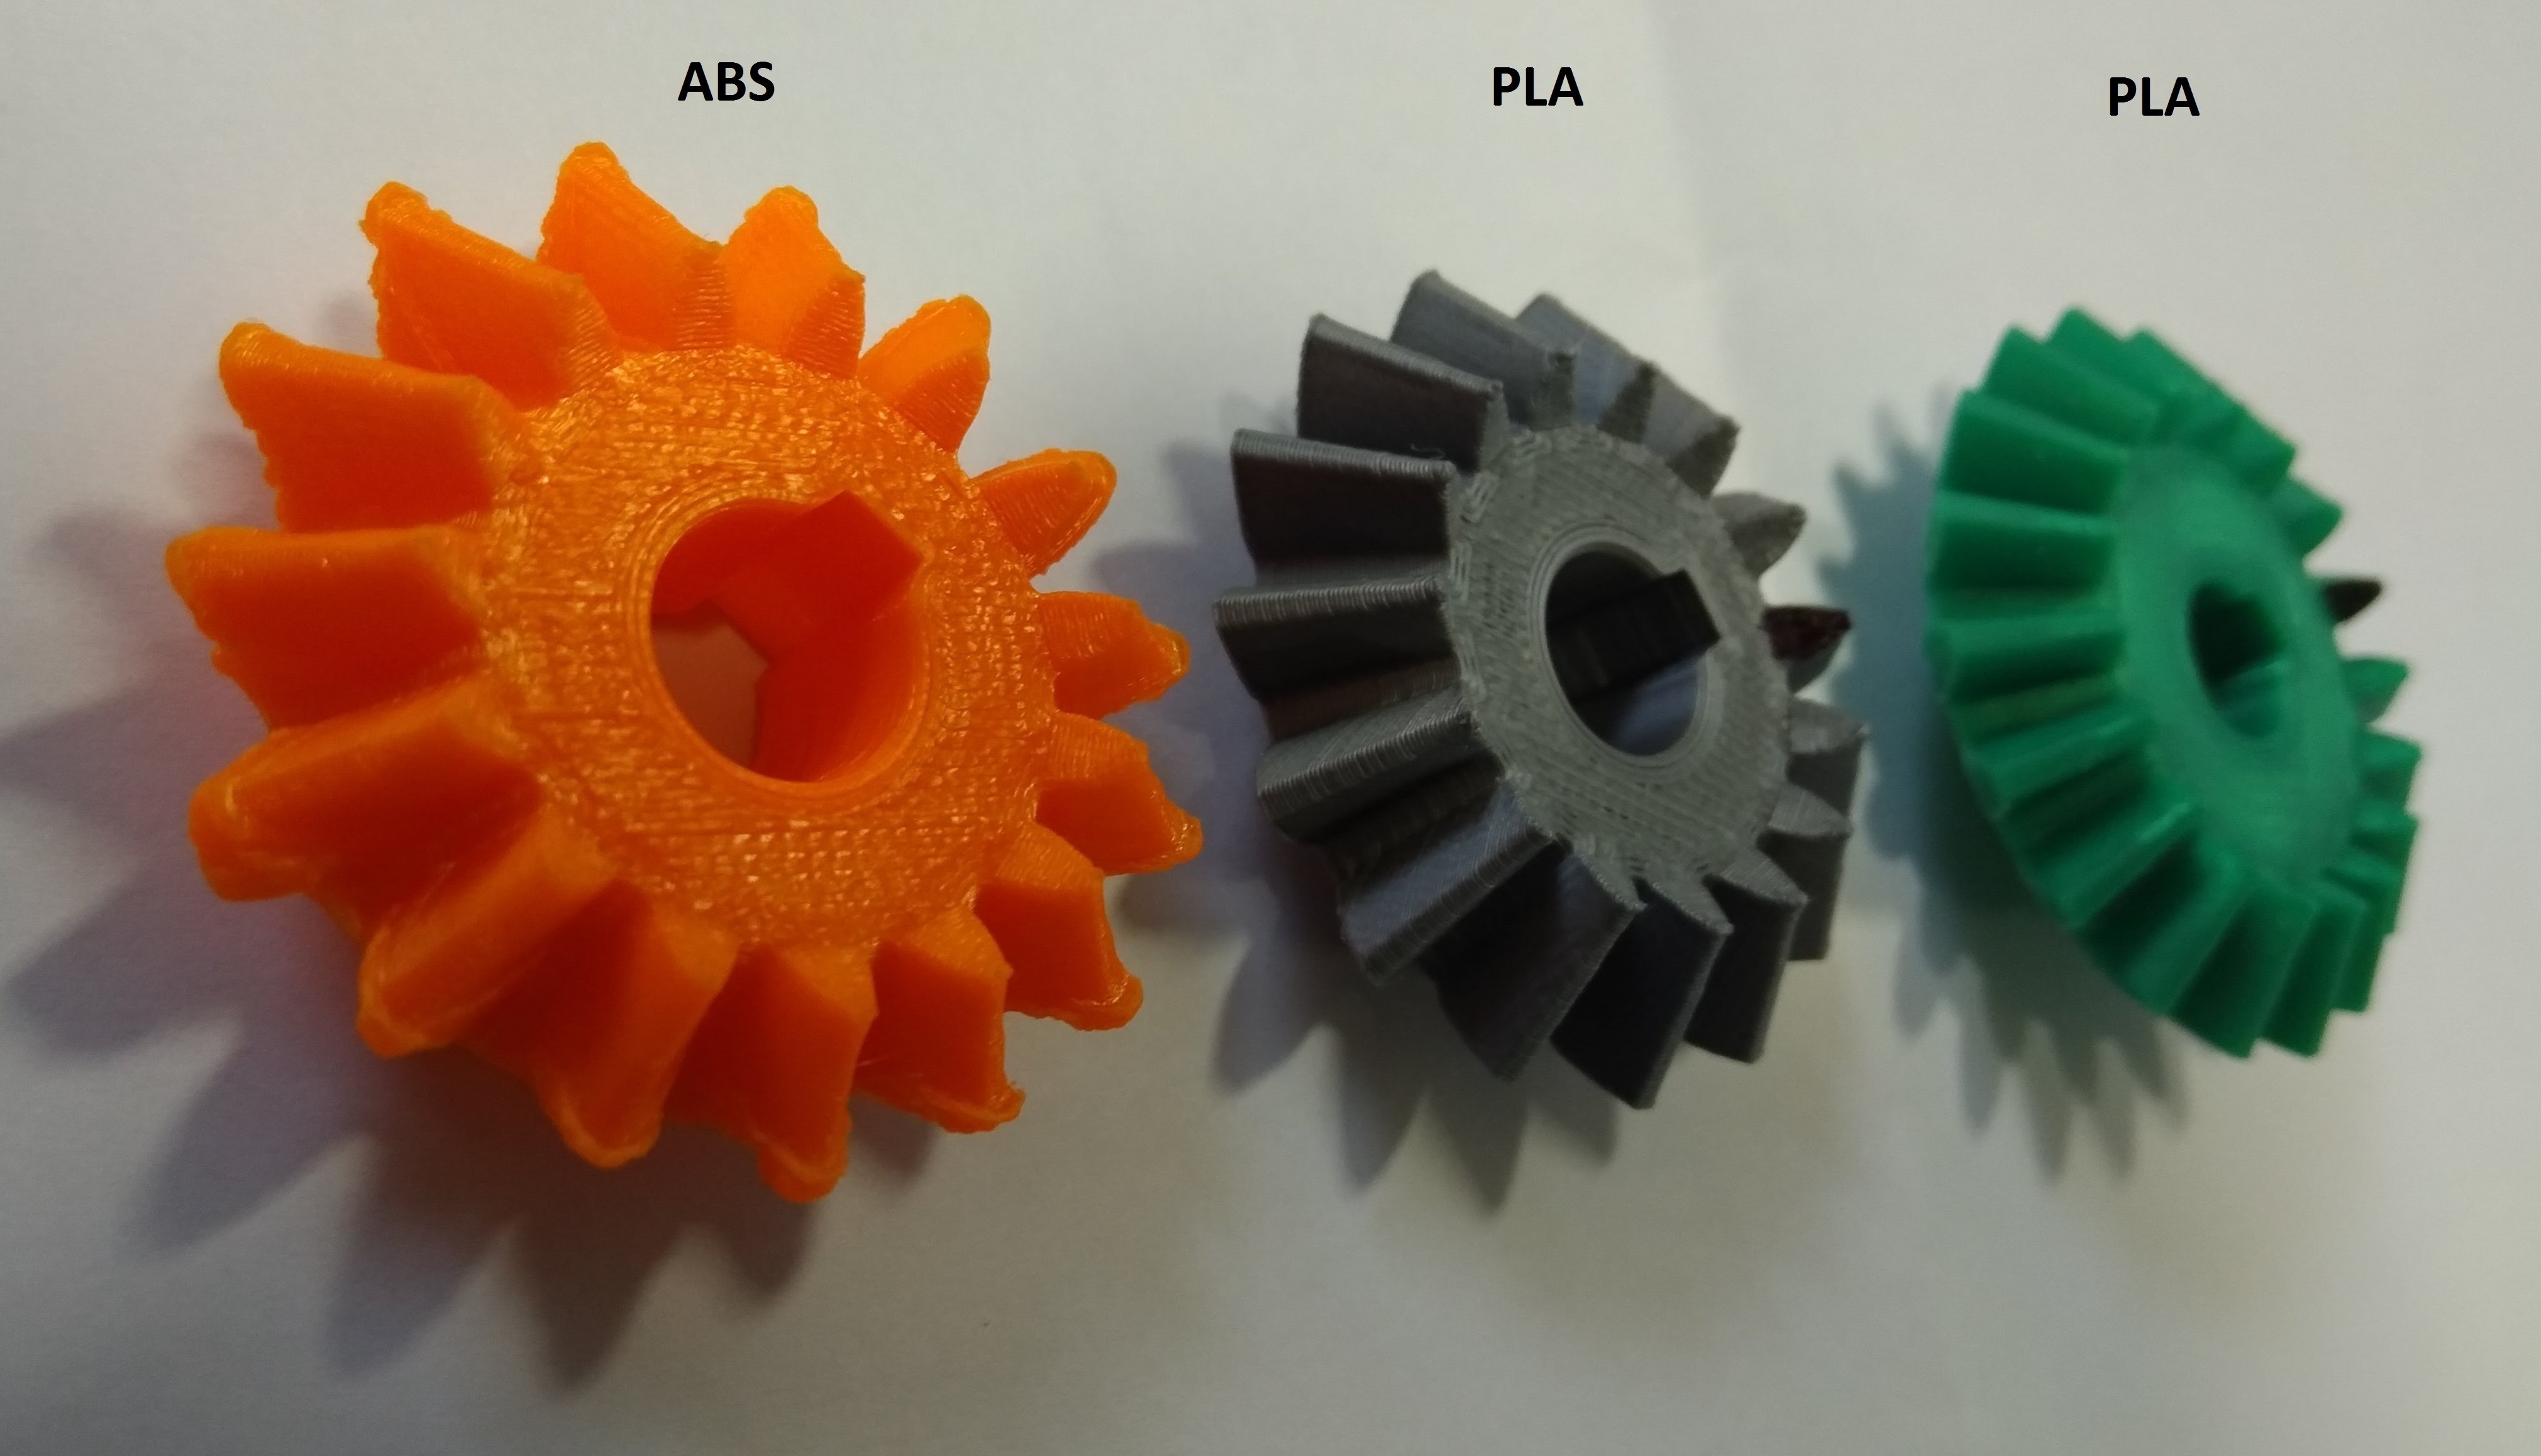 3D Printed Bevel Gears 5/6 by Charles Smith